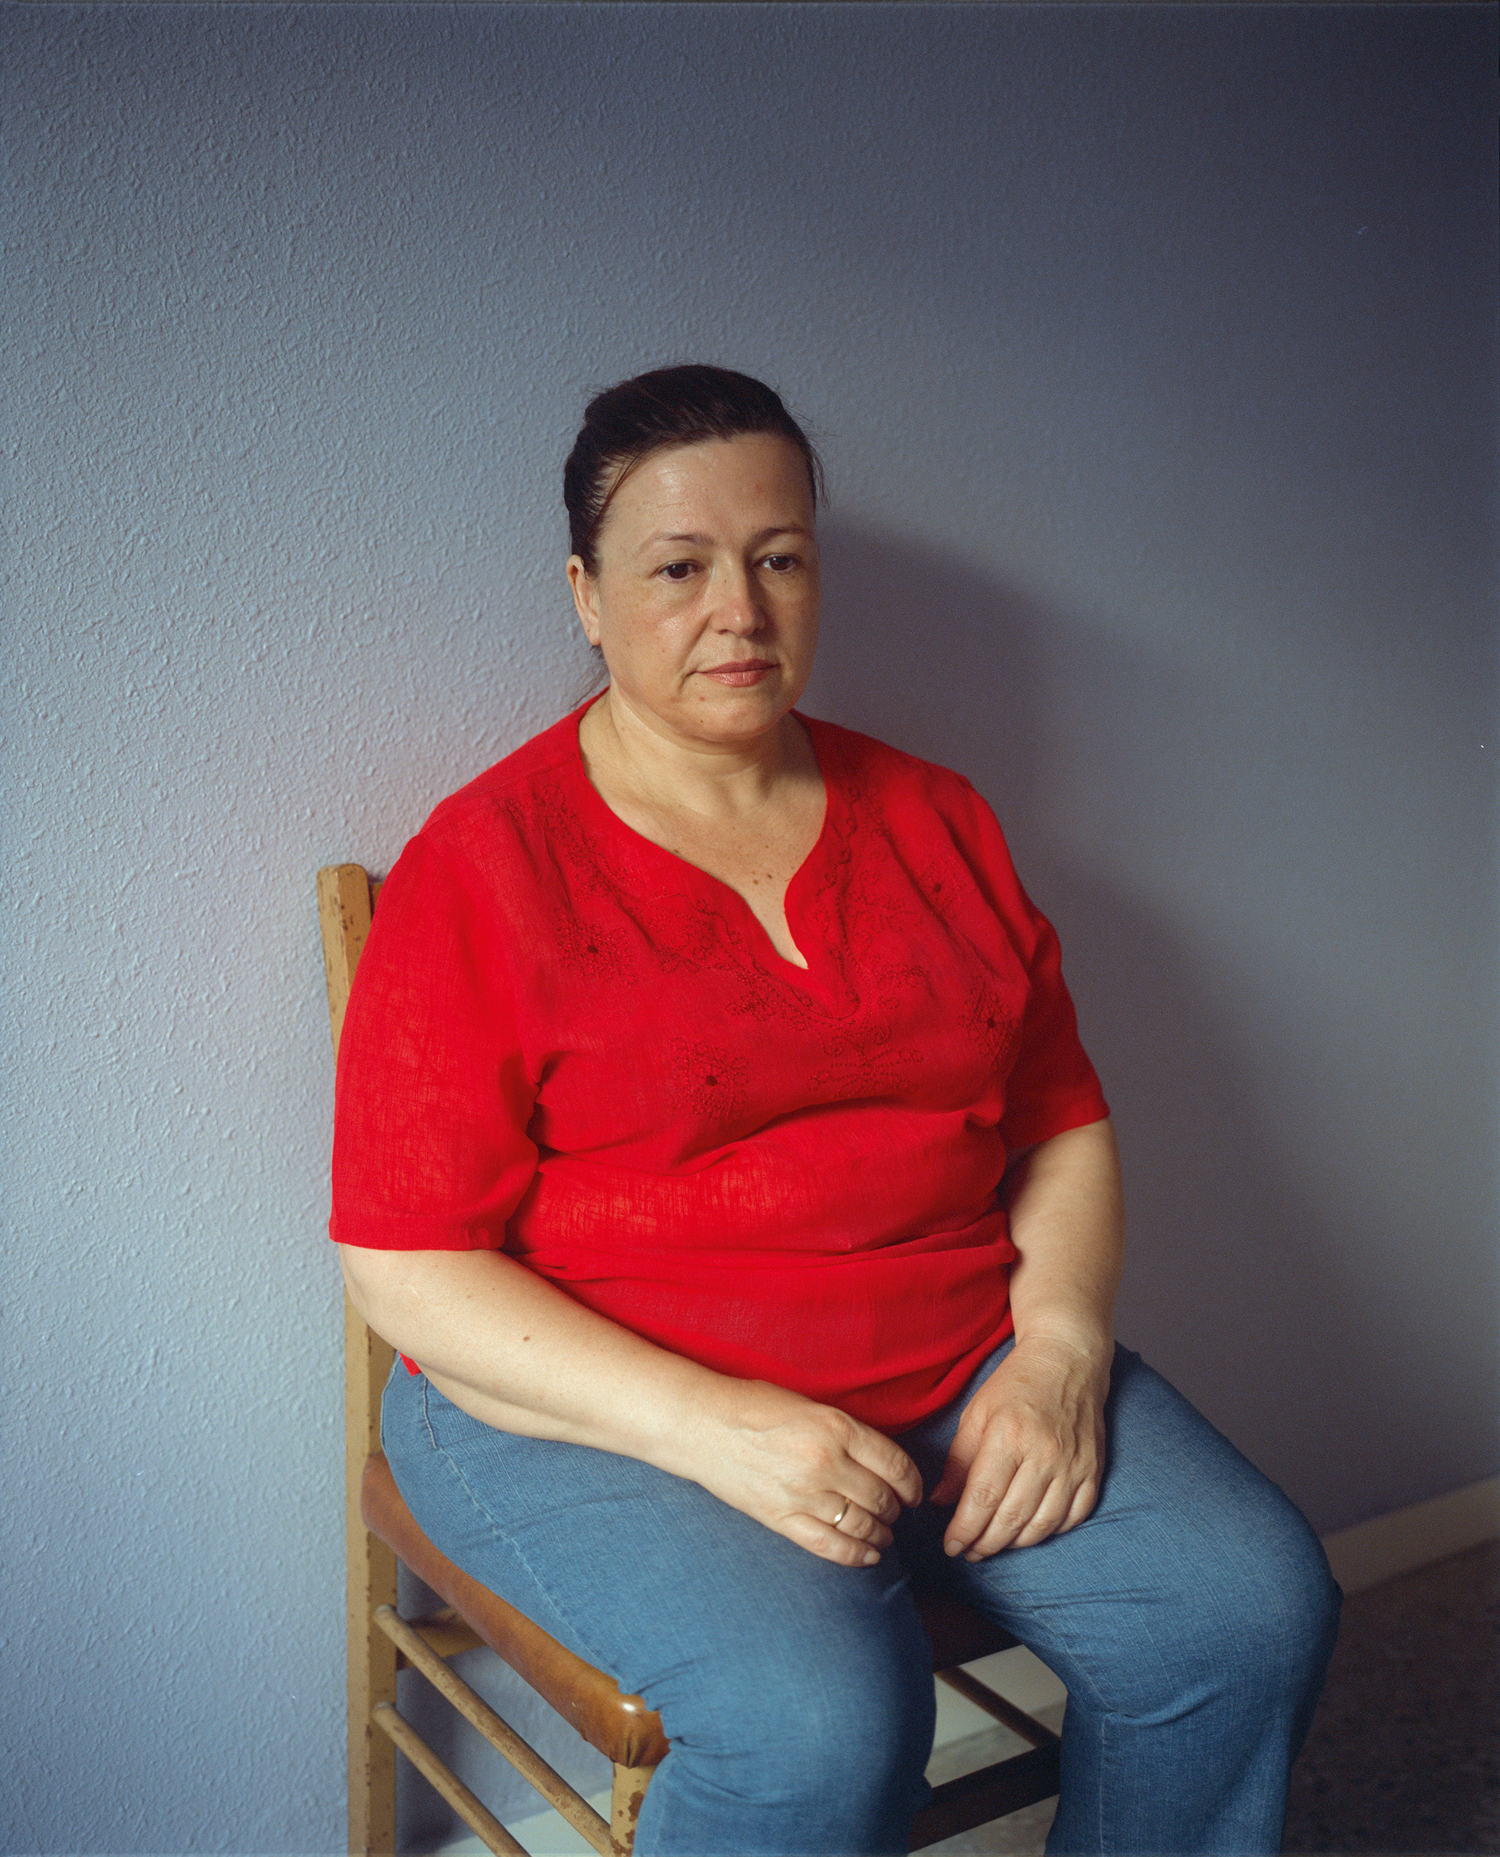 Powerful Photos of Sex Abuse Survivors | Time